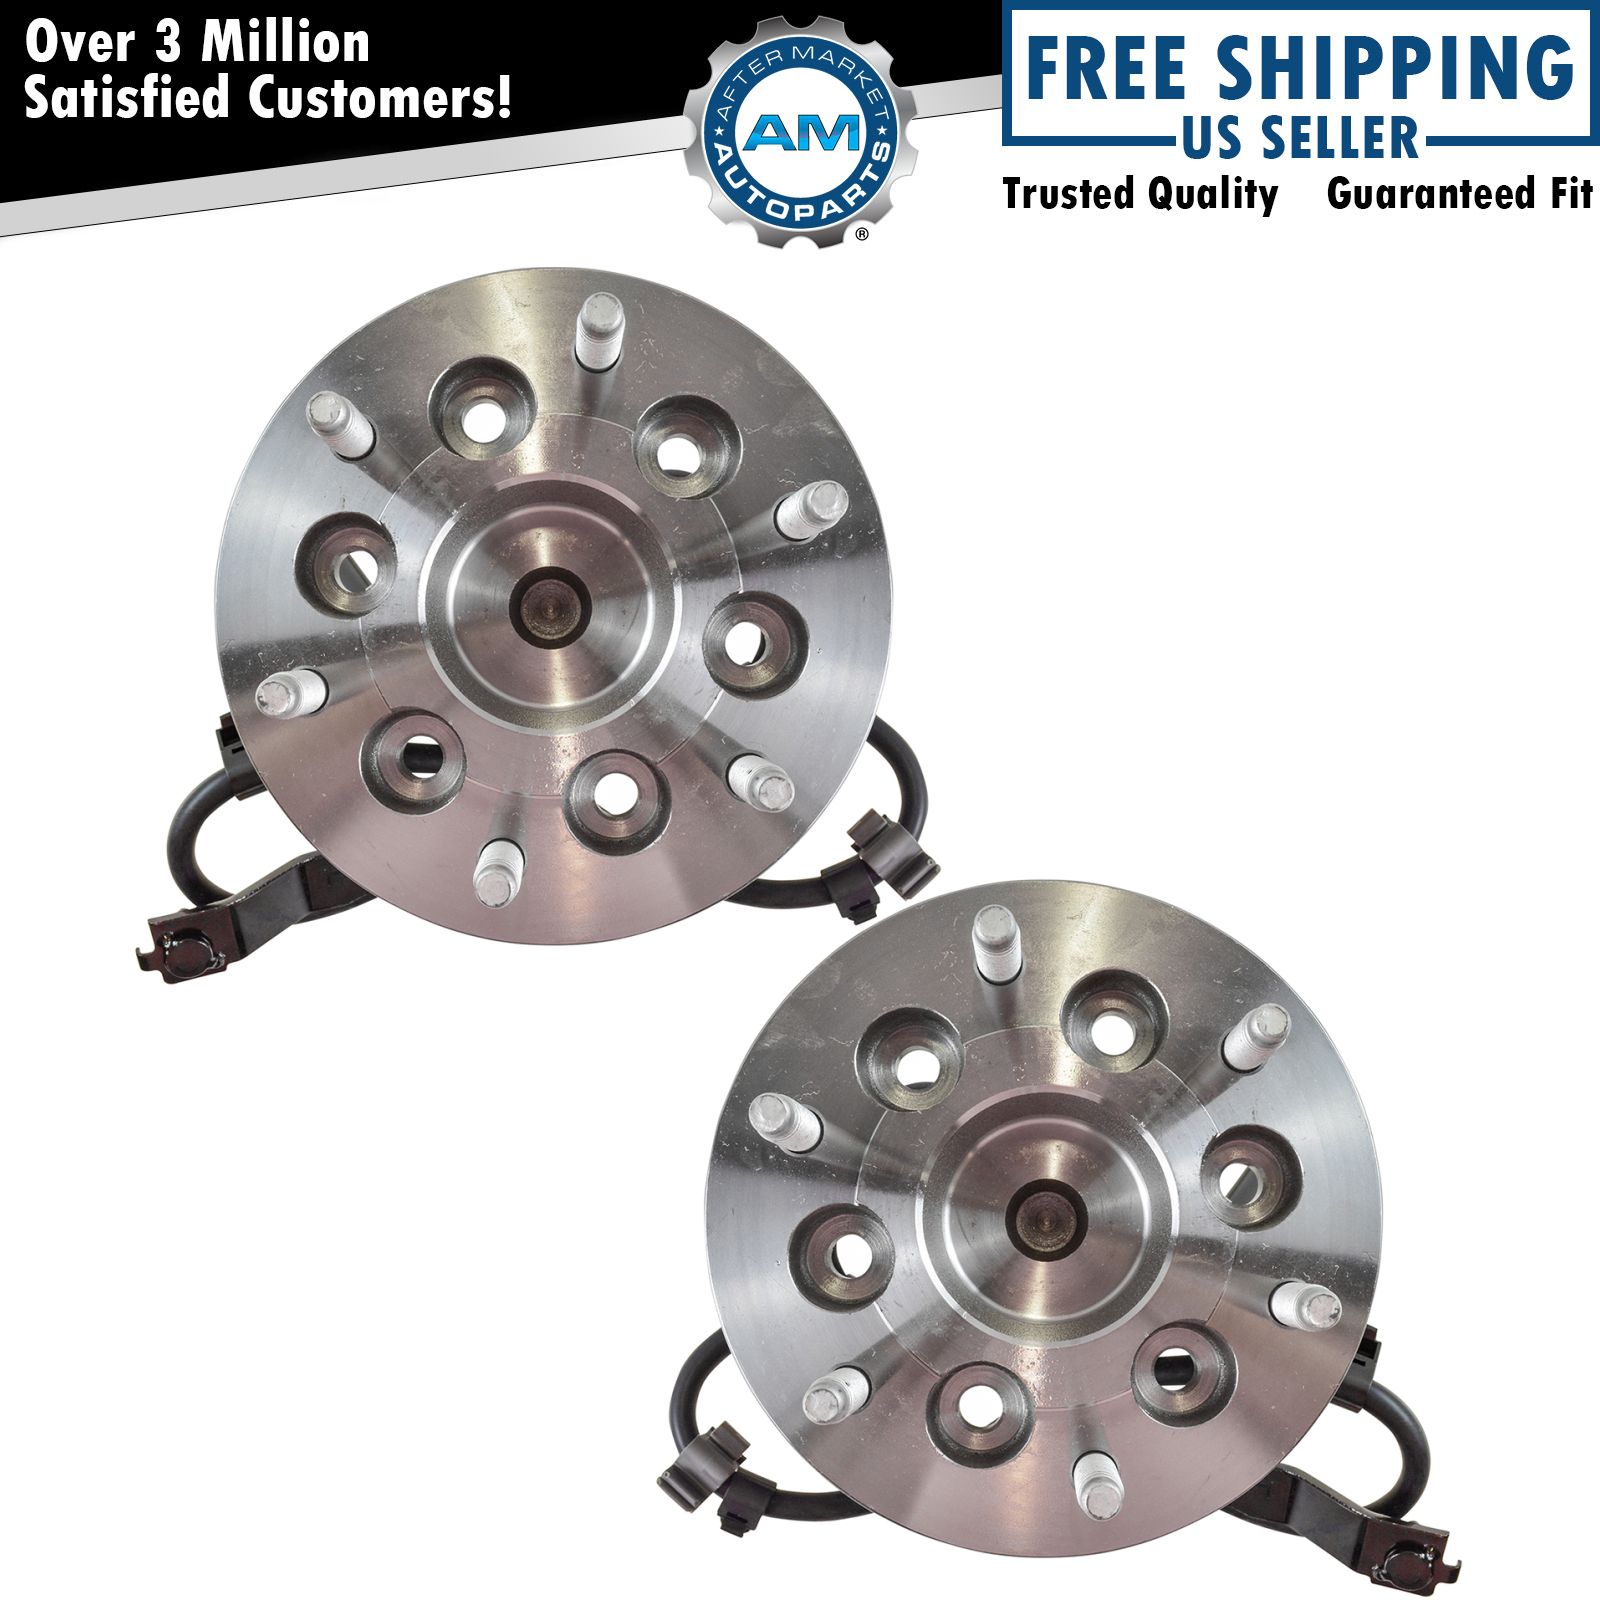 (2) Front Wheel Bearing & Hub for 2004 - 2007 2008 Chevy Colorado GMC Canyon 2WD